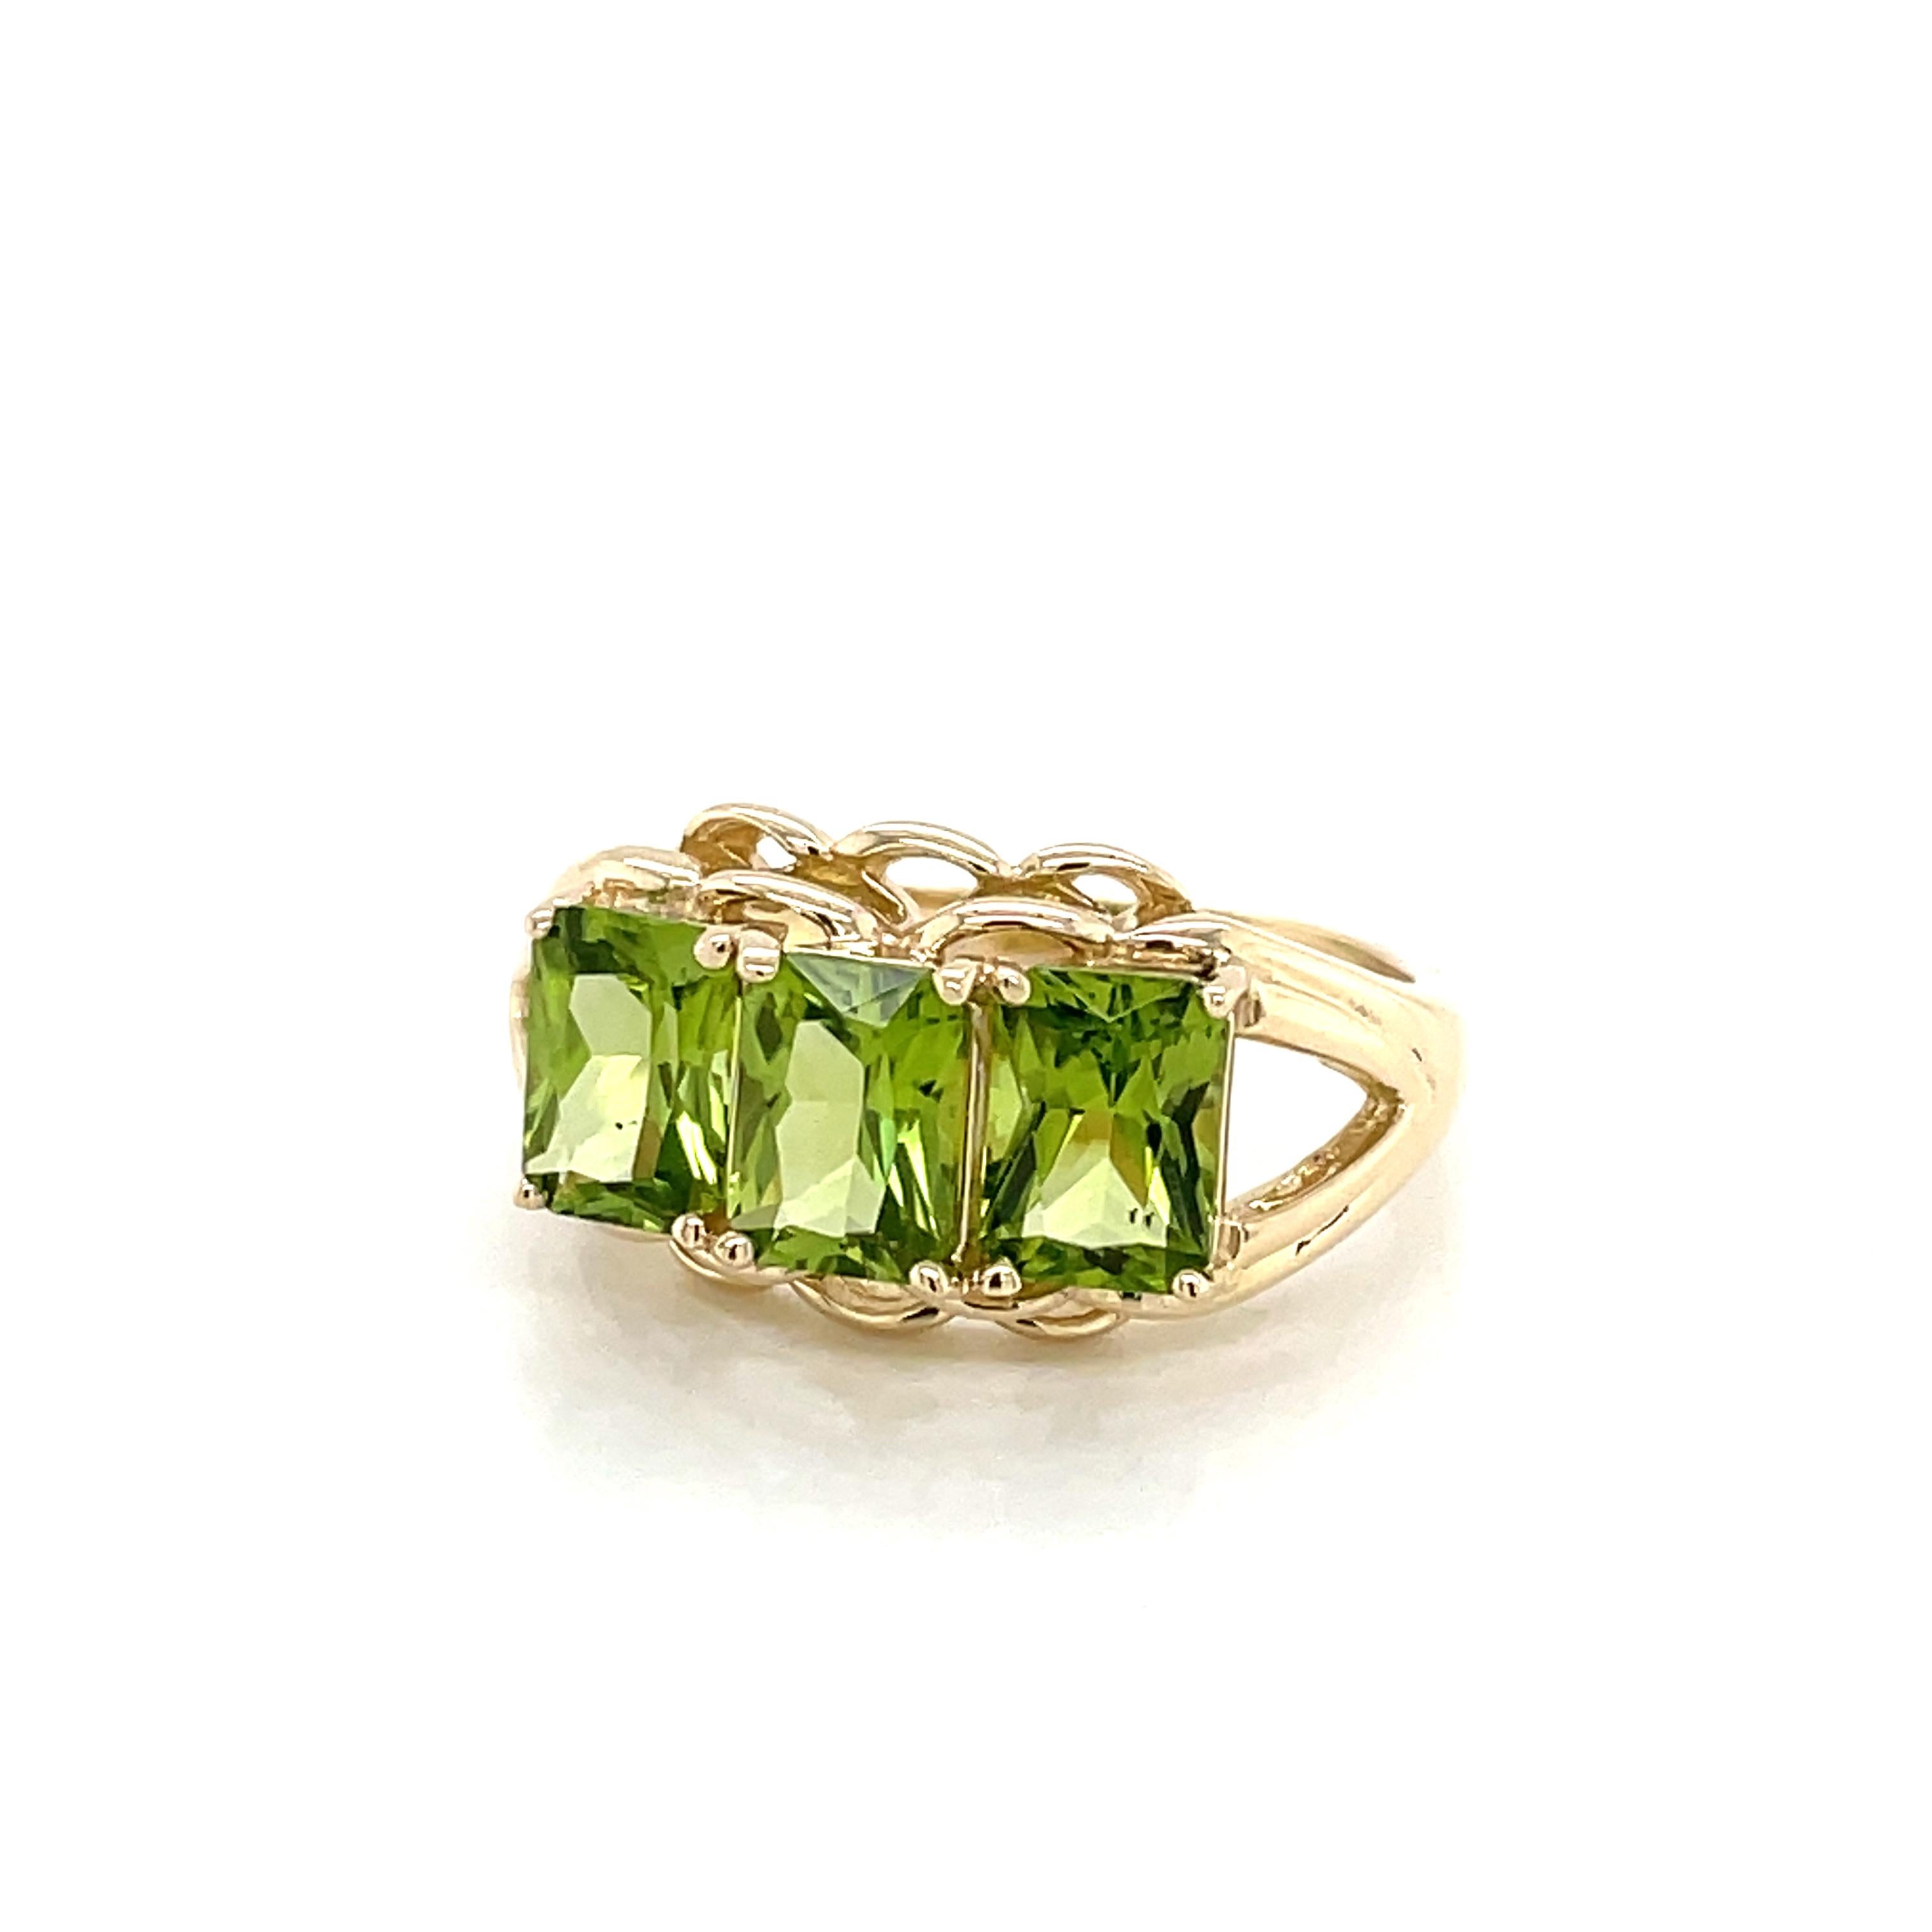 Alive and prominently displayed across the face of this gorgeous ring are three vibrant matching emerald cut peridot stones, each one carat, total weight 3 carats. In bright fourteen karat 14K yellow, a raised gallery of gold presents the striking